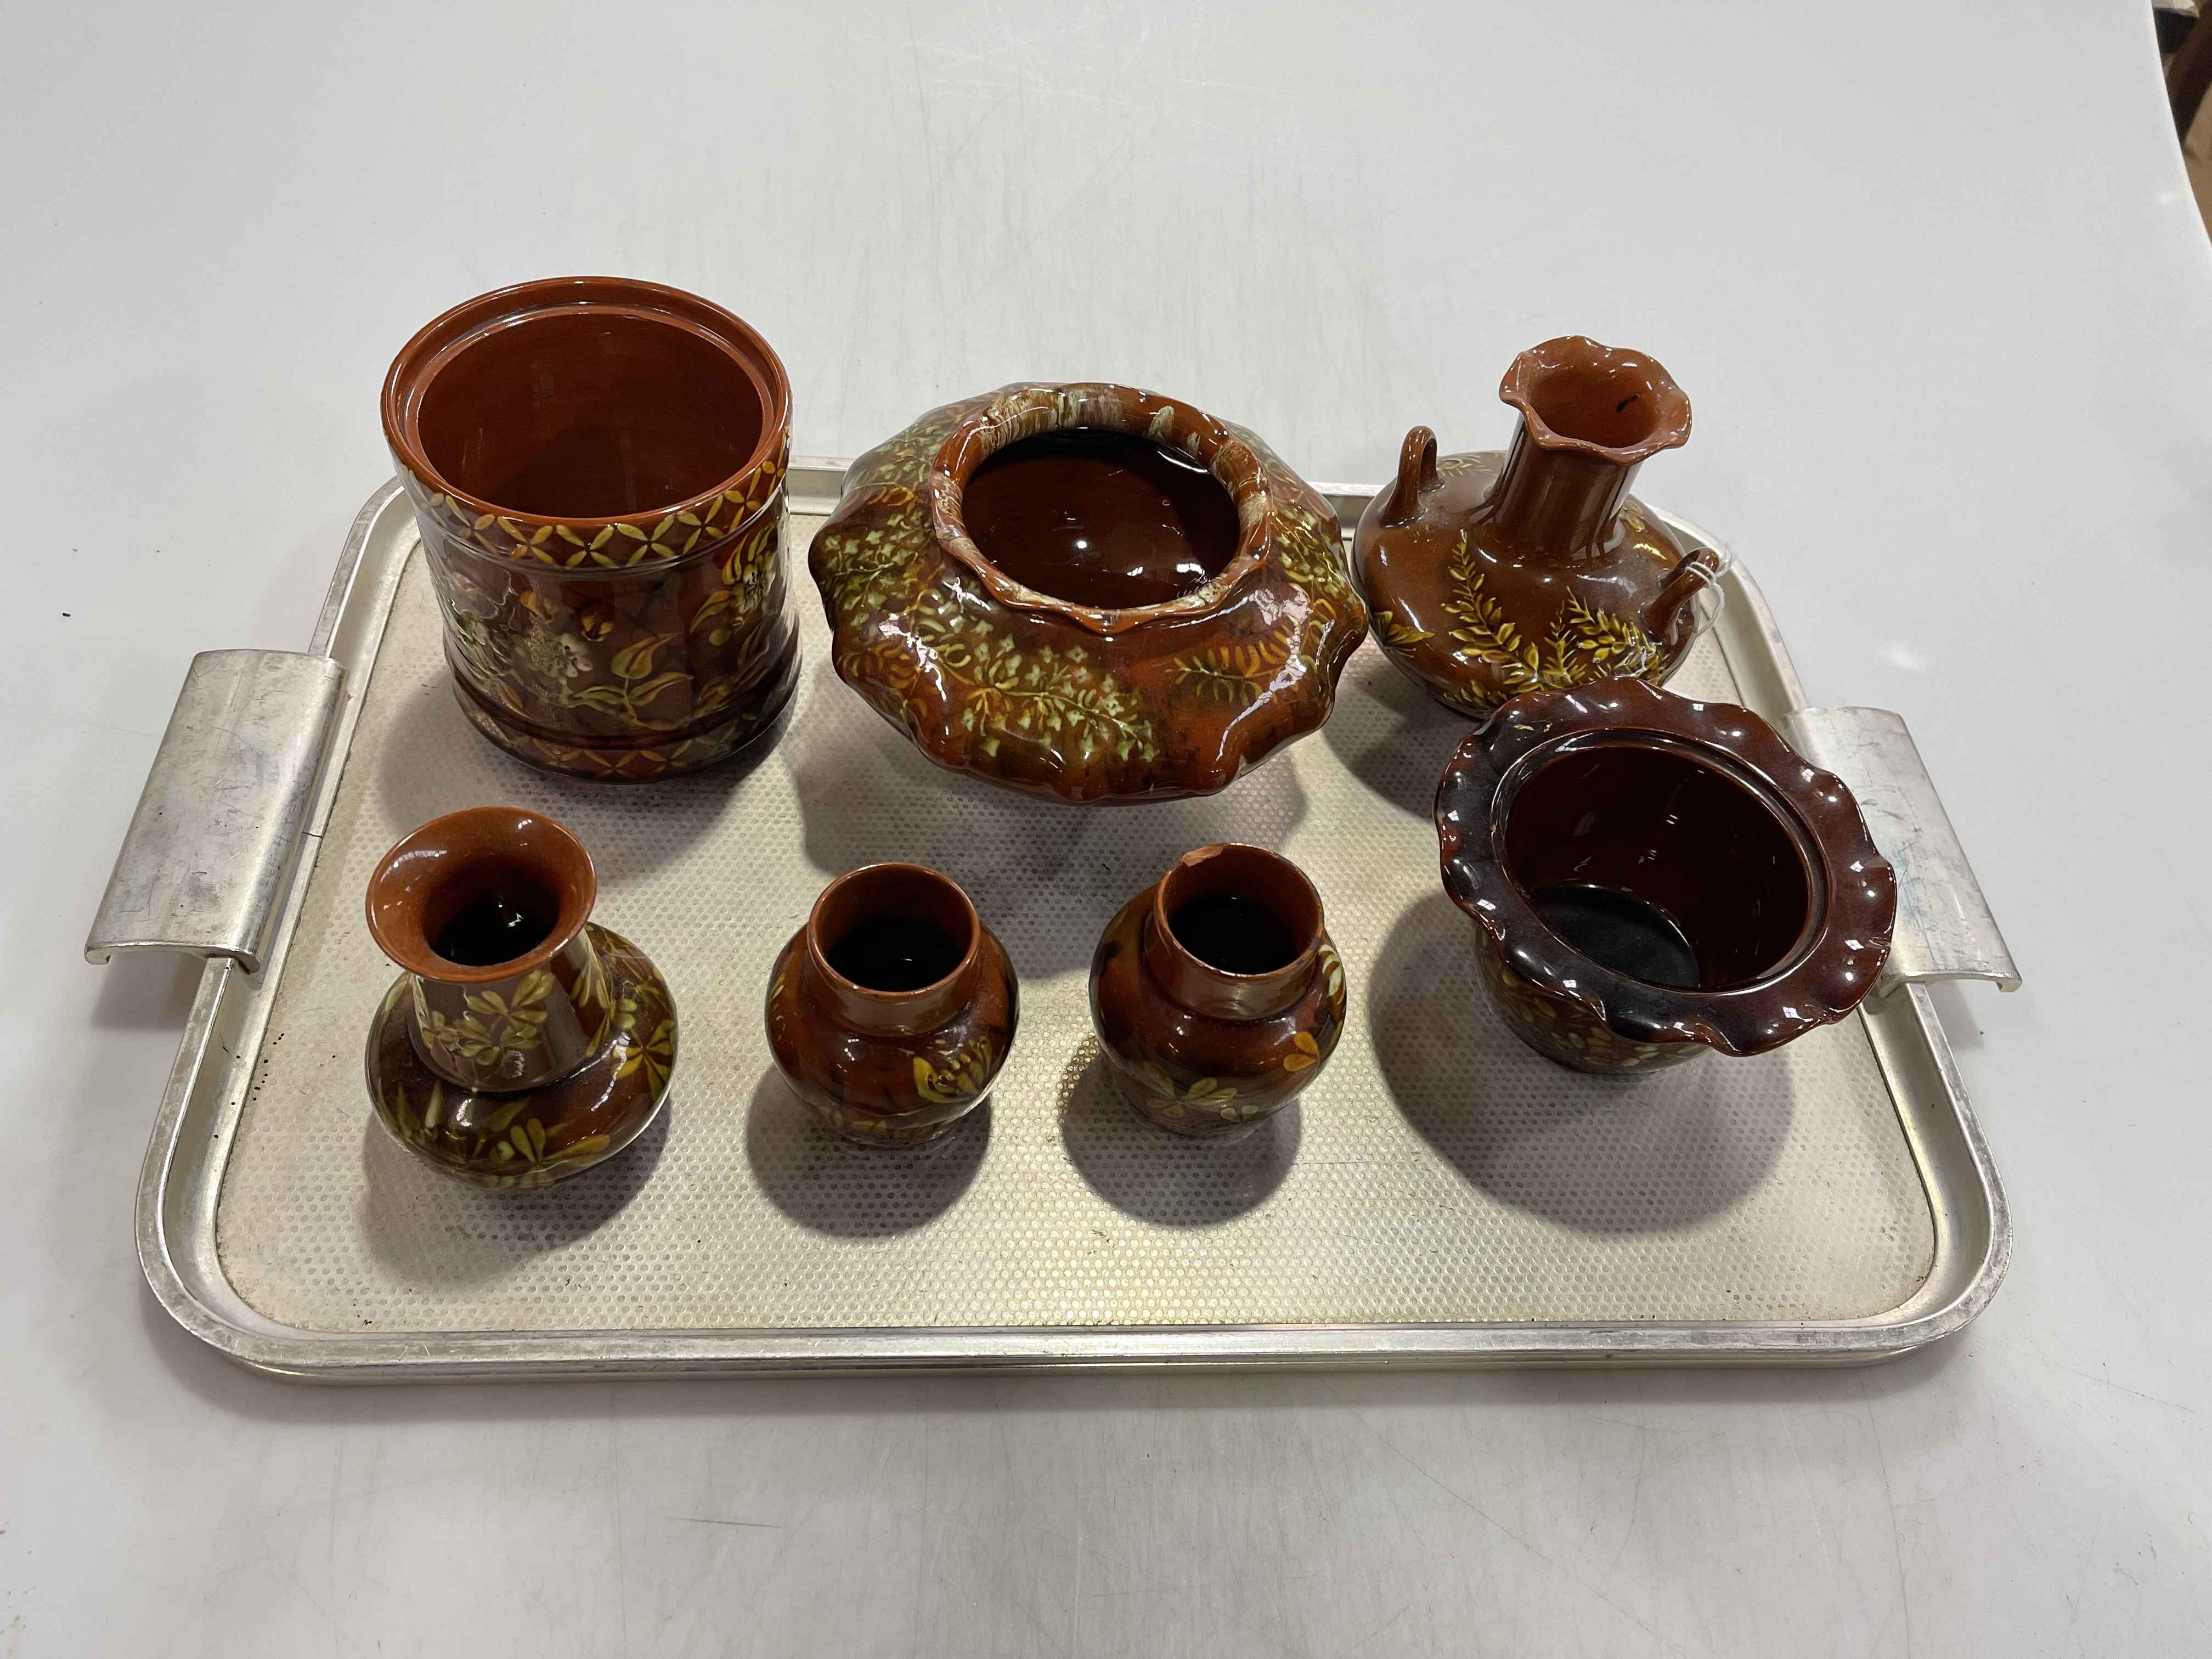 Linthorpe Pottery: seven pieces of floral decoration on brown ground.